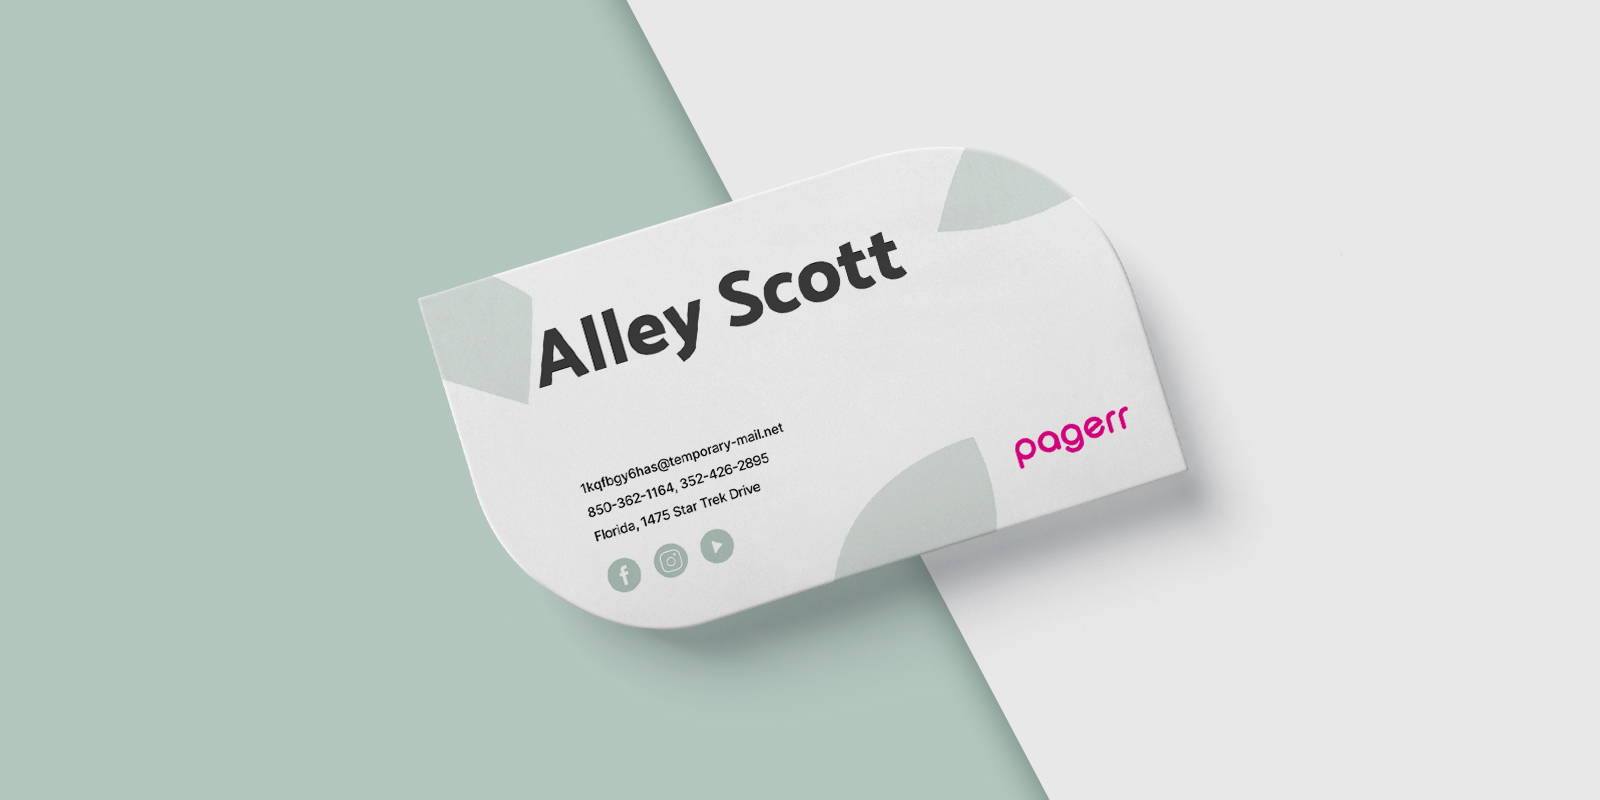 Special shape business cards in Paris - Print with Pagerr